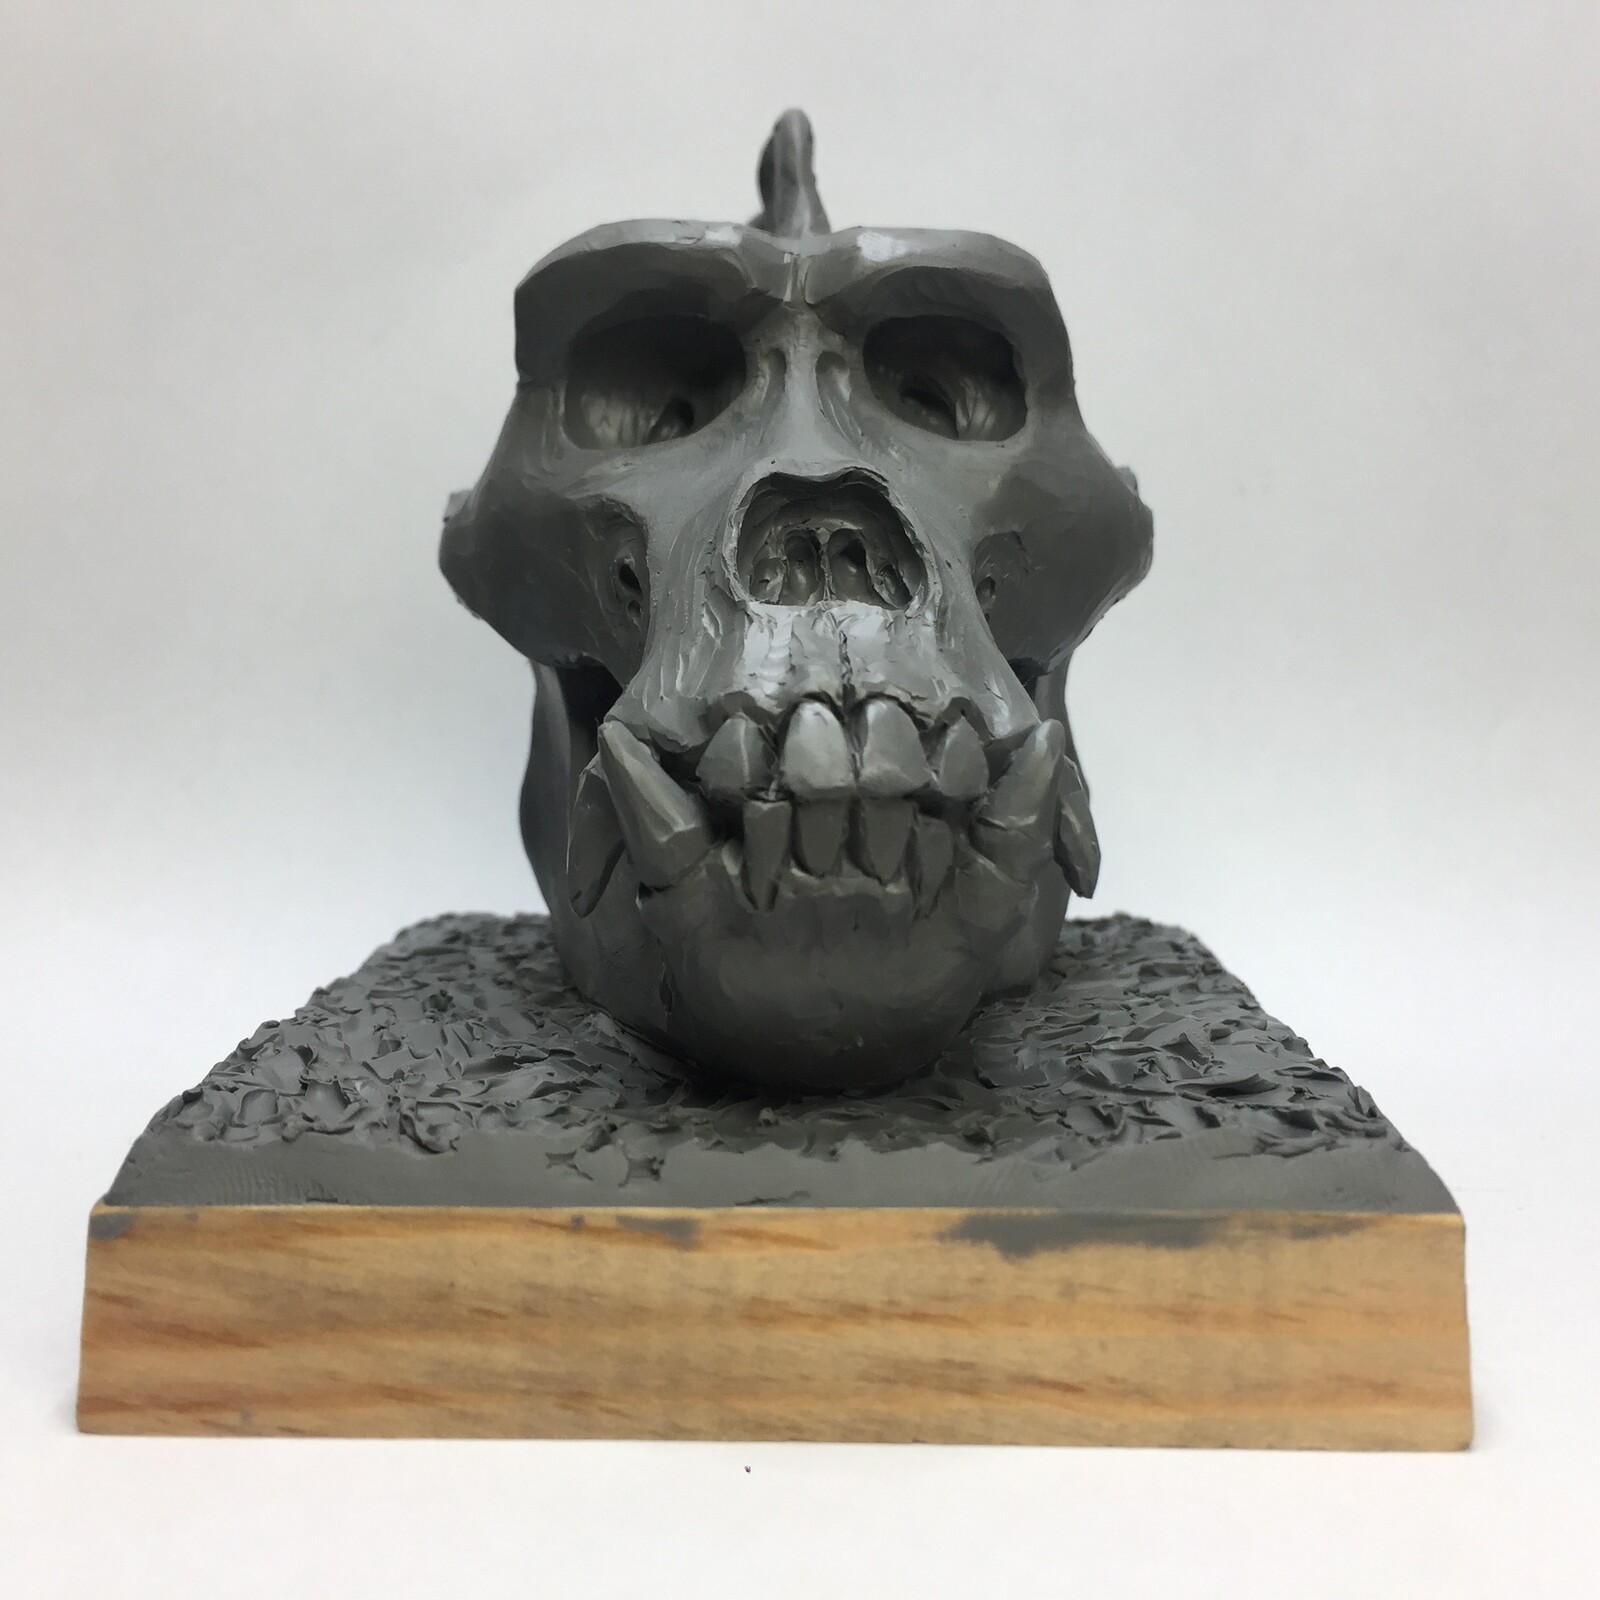  Just for fun and practicing knowledge about the gorilla skull. Would you like to have such a small part of the reference on your shelf?